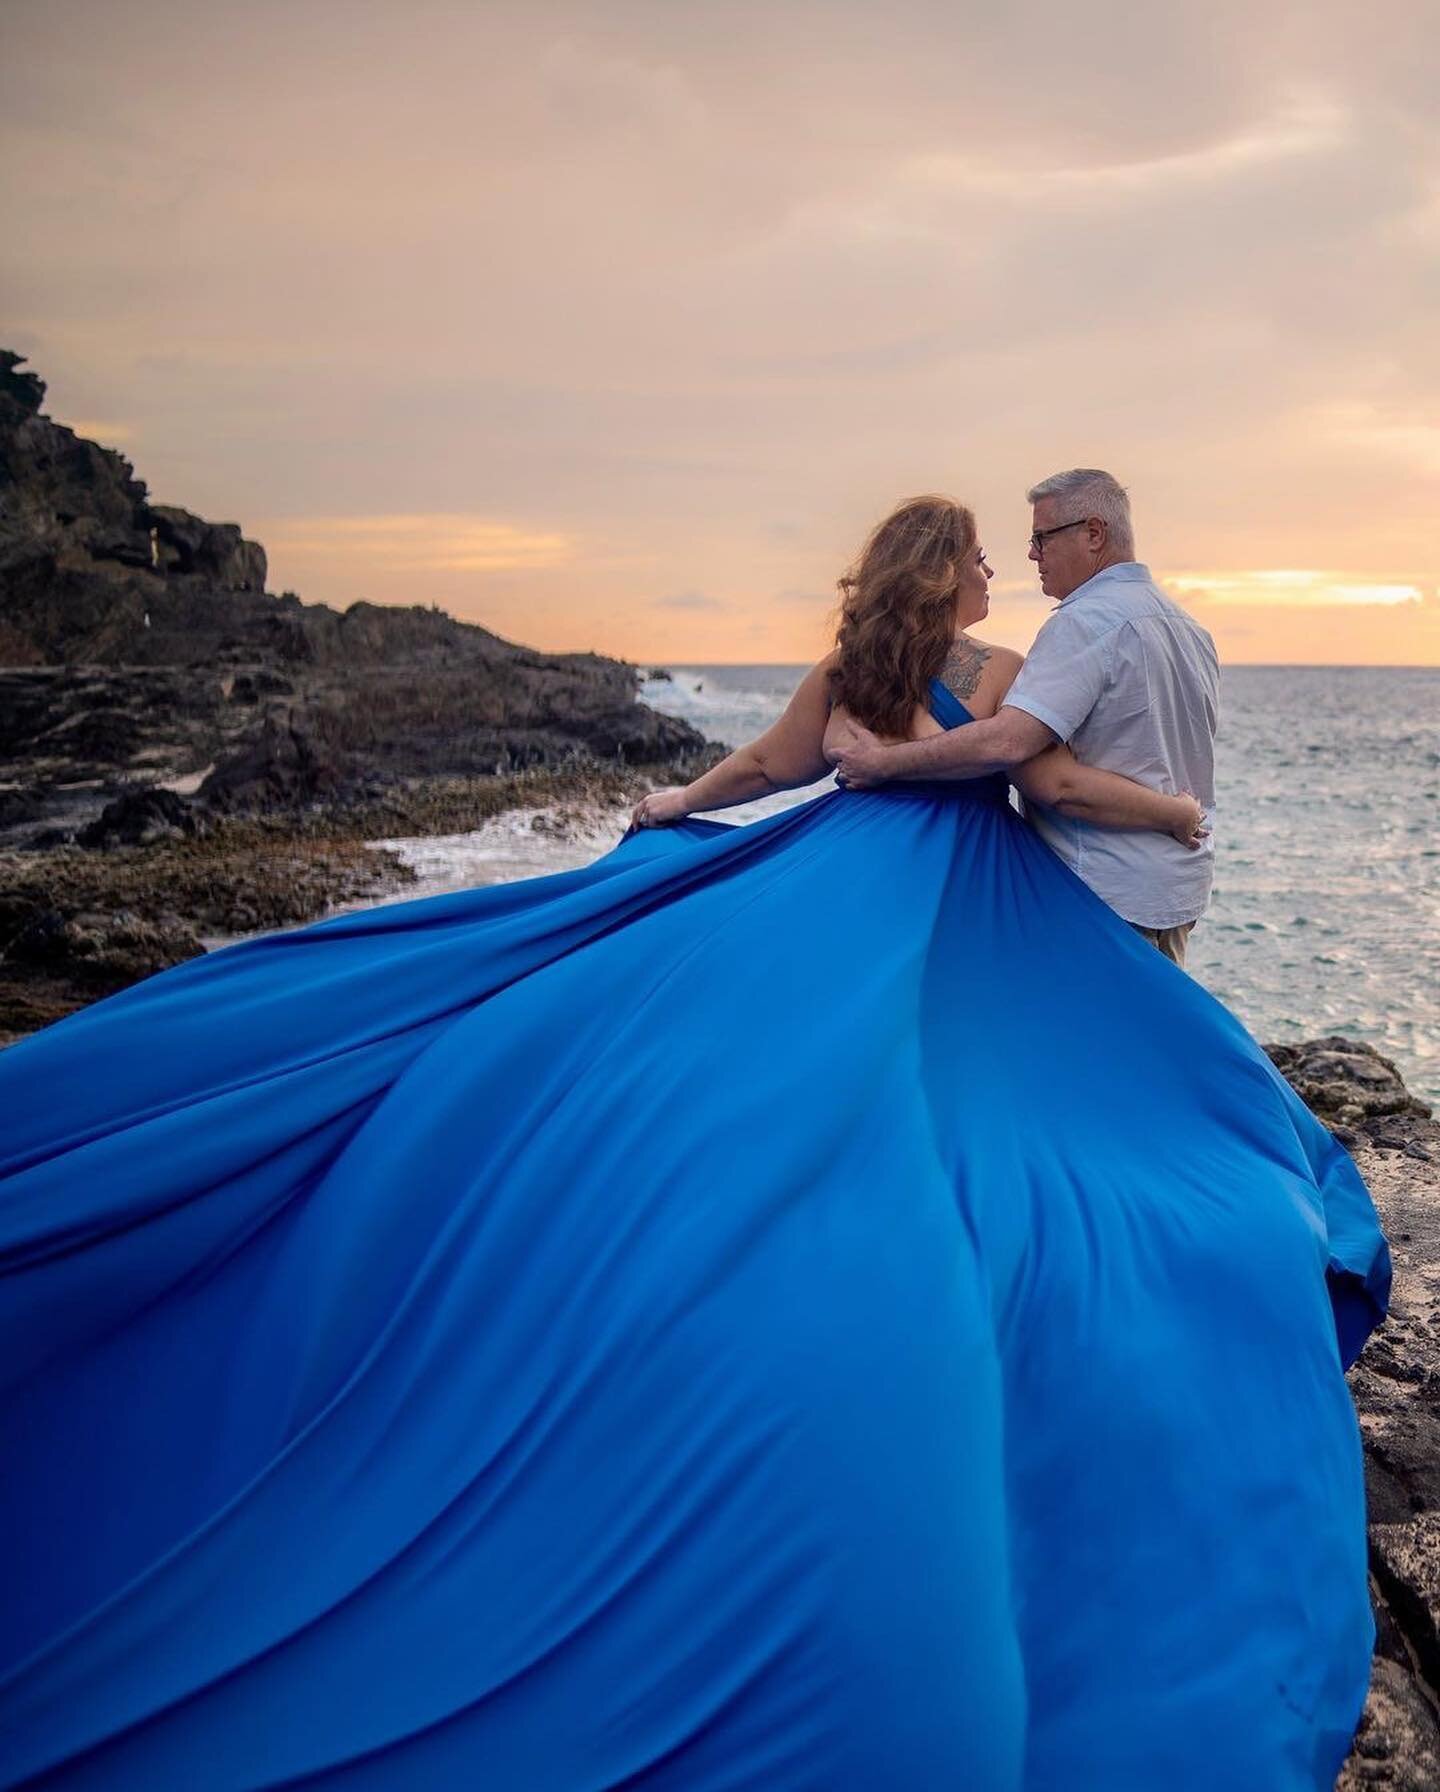 Happy 10 Year Anniversary to Michelle and Andy! 💙💍

💃🏻 @nurse4u12
📸 @flyingdressphotographer 
📍Oahu, Hawaii

Hi Flying Dress is the leading Design House and retailer of Flying Dresses in the world. Its presence encompasses rentals, retail, whol